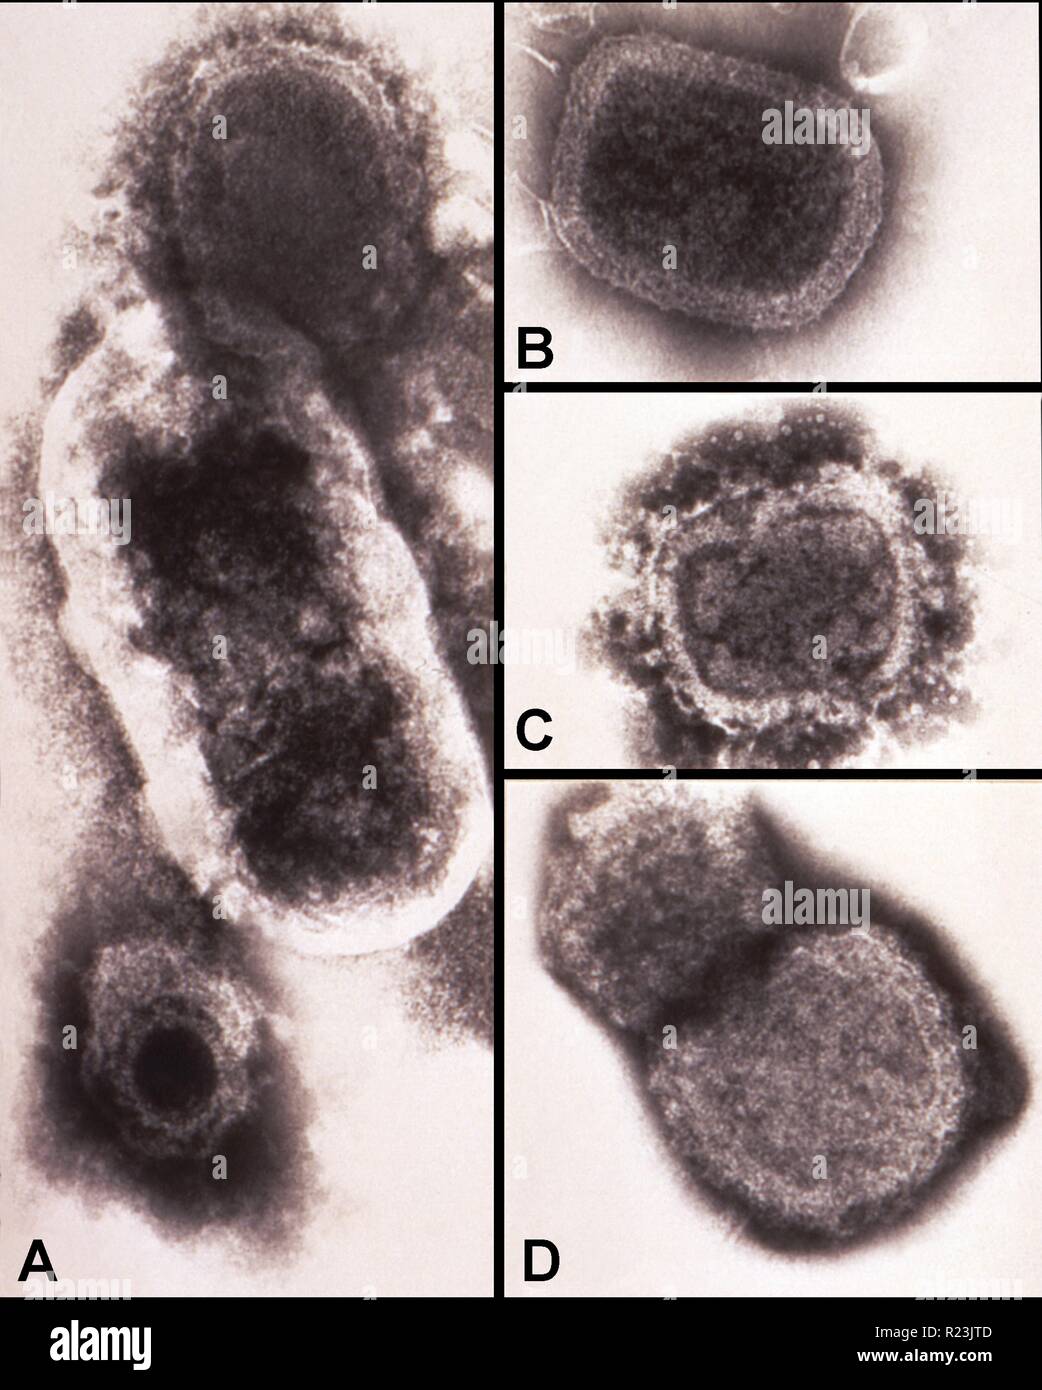 High magnification of 150,000X, negatively-stained transmission electron micrograph (TEM) revealing some of the ultrastructure morphology exhibited by a number of different microorganisms. Panel 'A' represents a composite micrograph, for comparing the size difference between a poxvirus at the top, a bacillus in the middle and a herpesvirus at the bottom. Panels 'B', 'C' and 'D' are TEMs depicting the sequential degeneration of variola virus patricles. Stock Photo